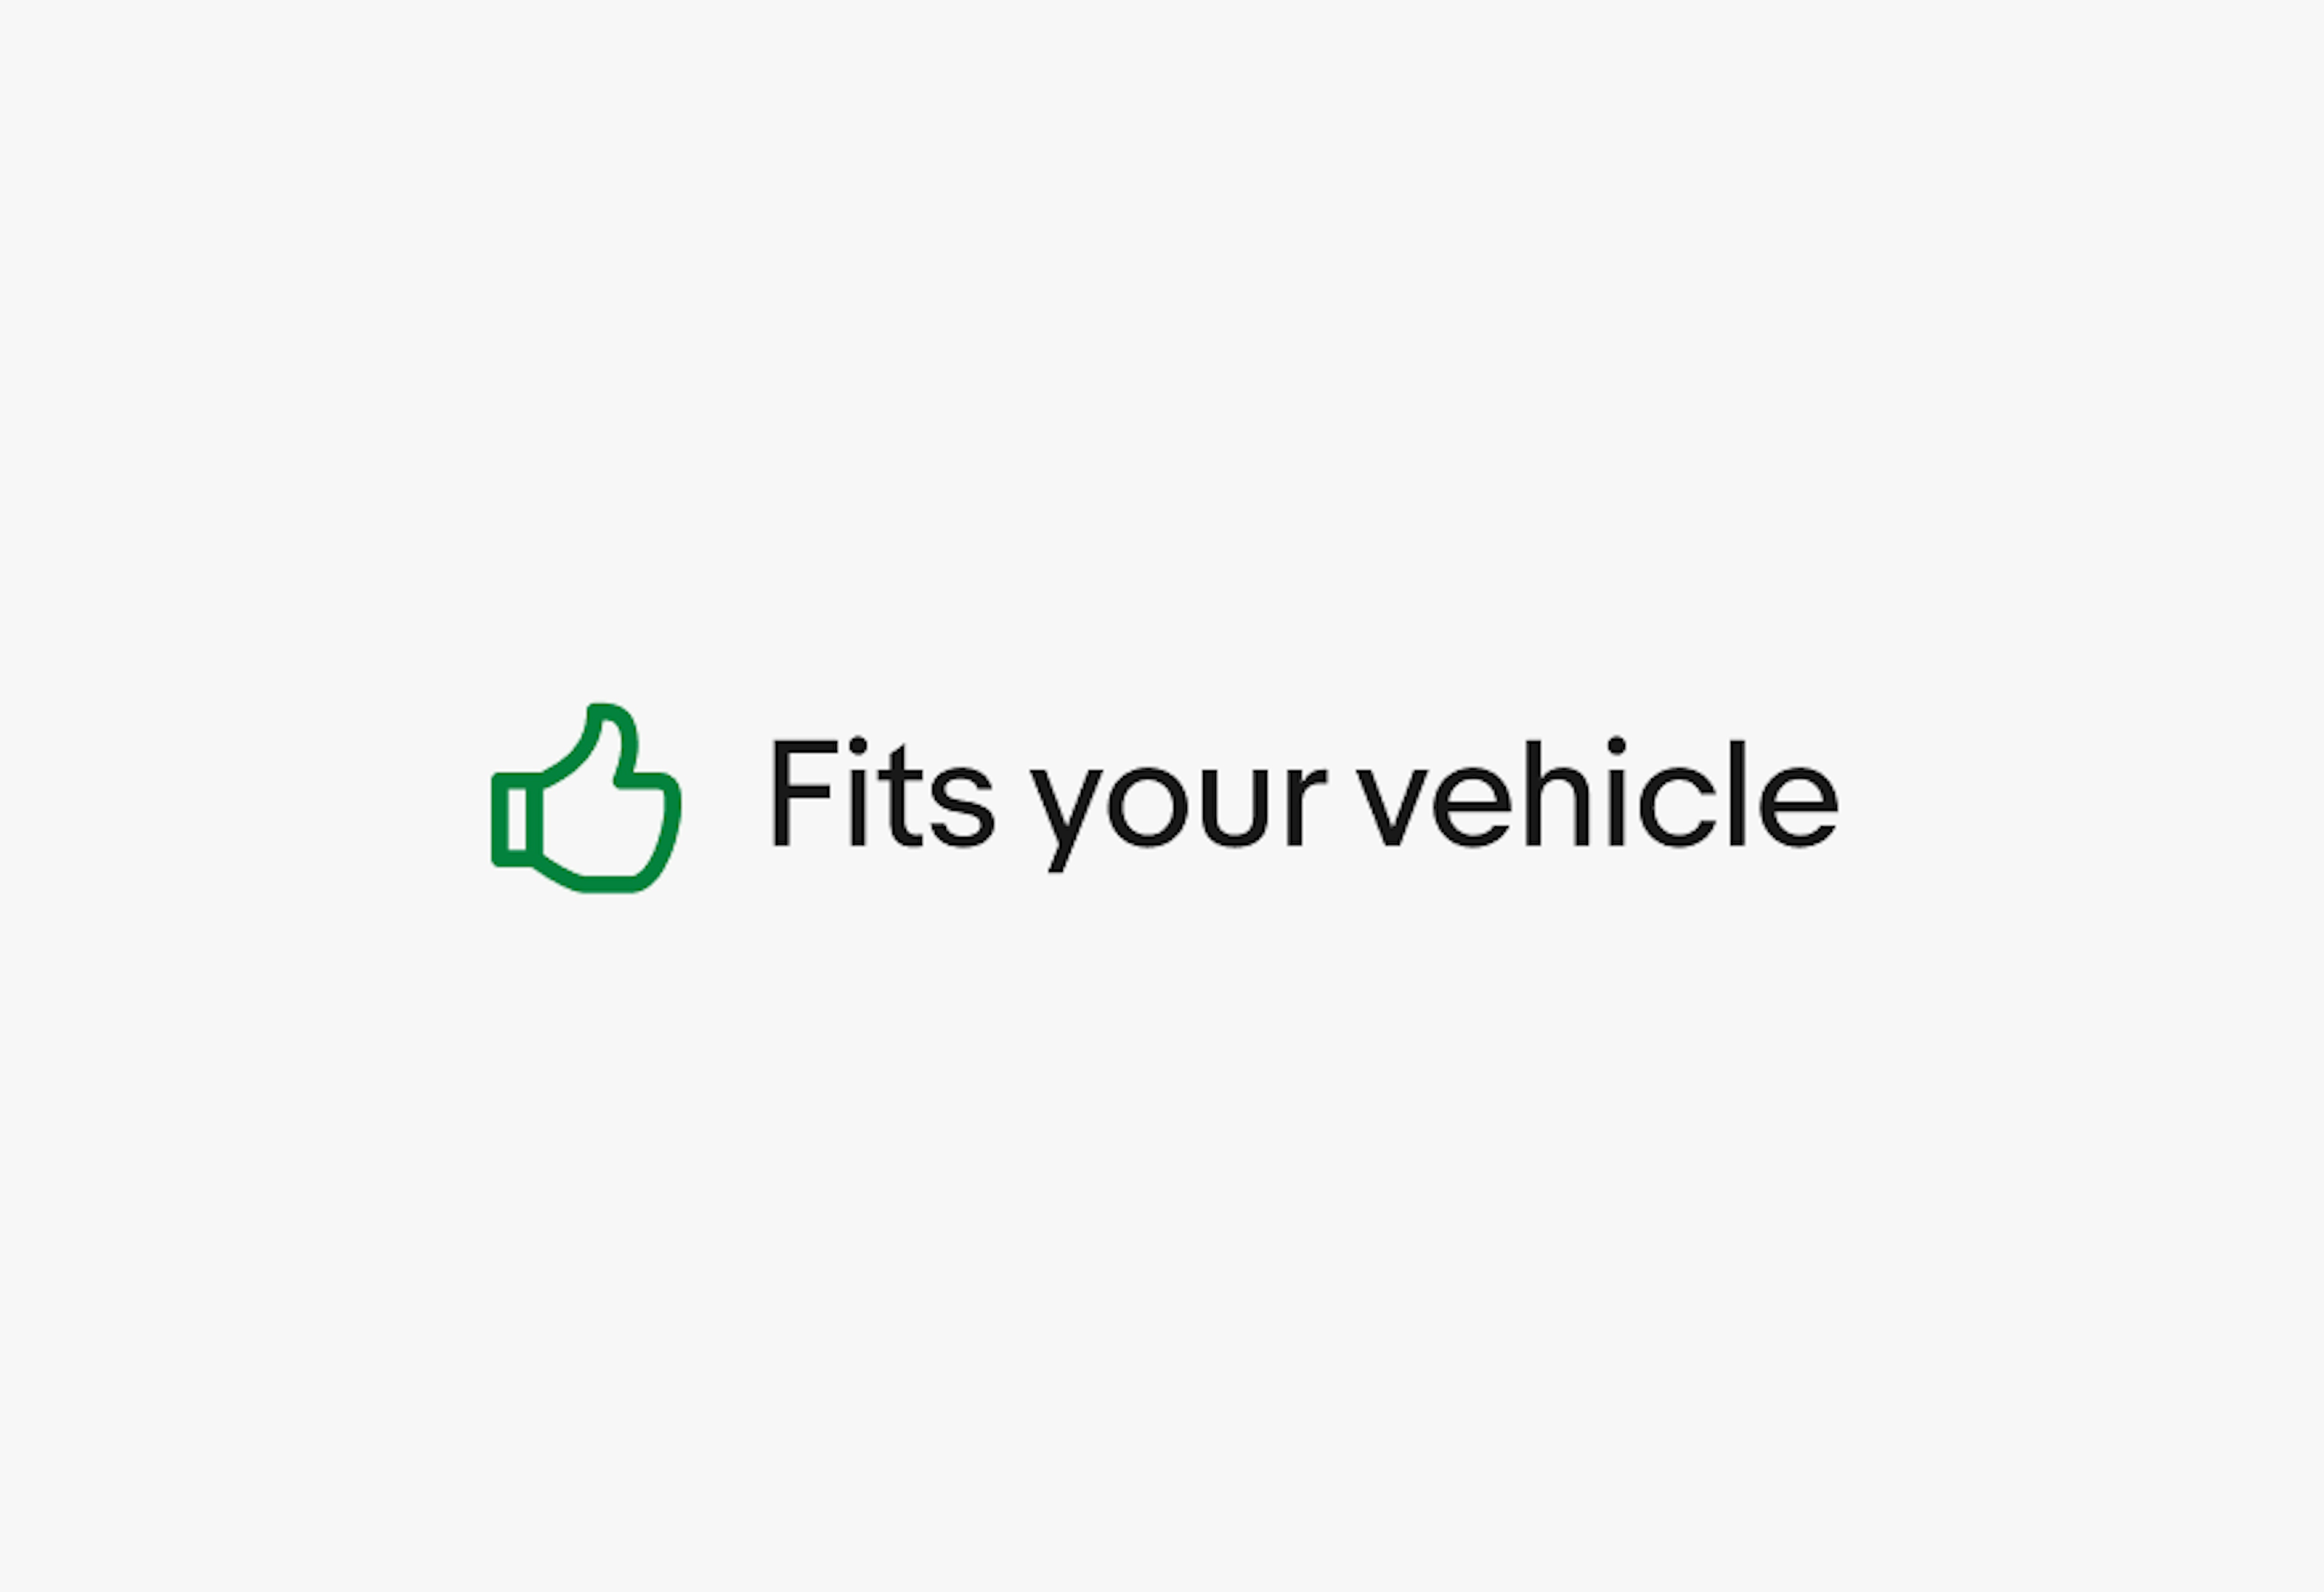 A green thumb up icon next to the text “Fits your vehicle.